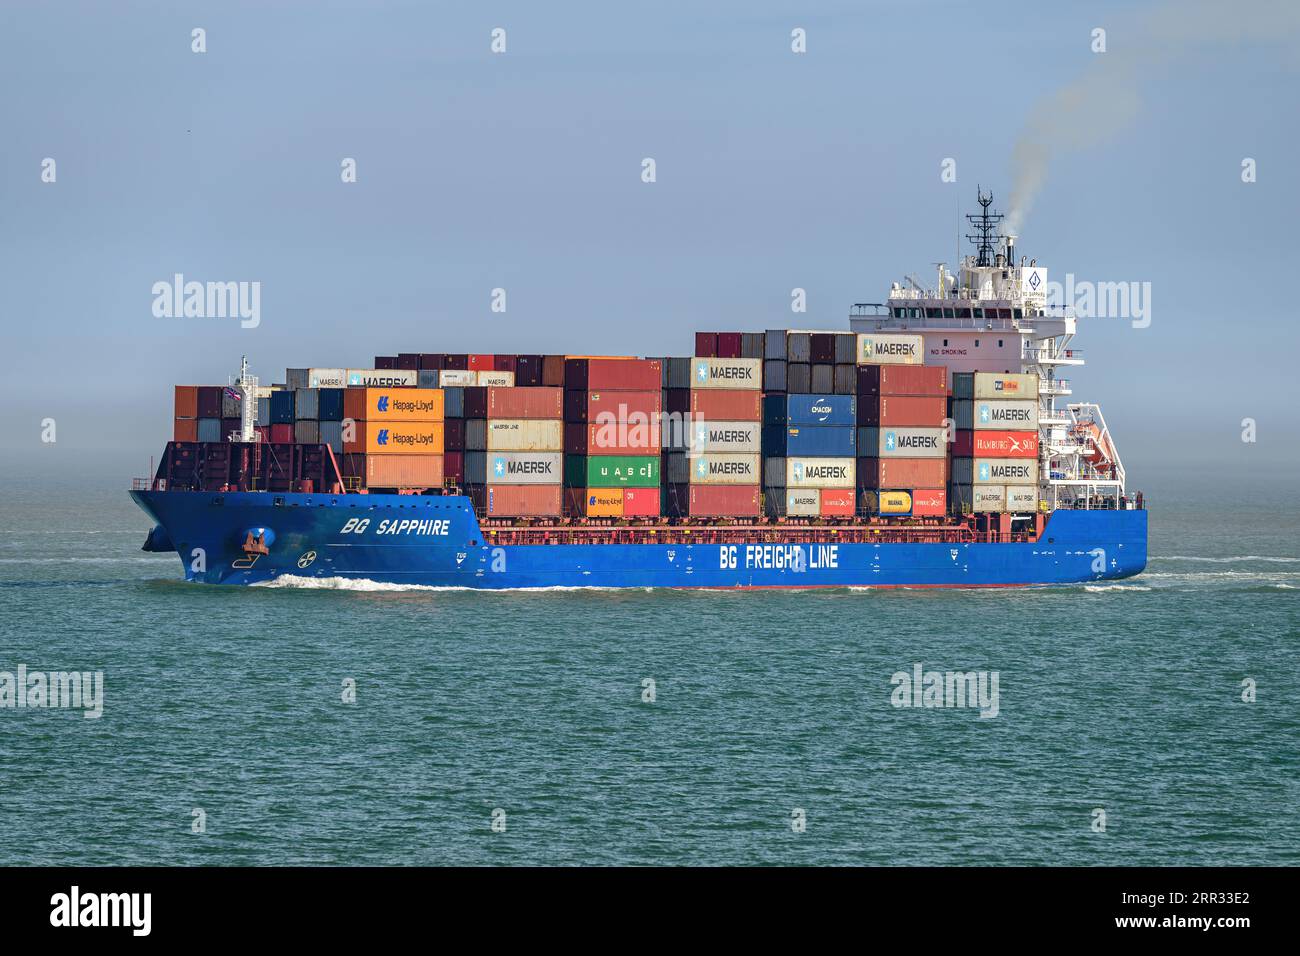 BG Sapphire is a feeder container ship operated by BG Freight Line between UK and European ports. Stock Photo